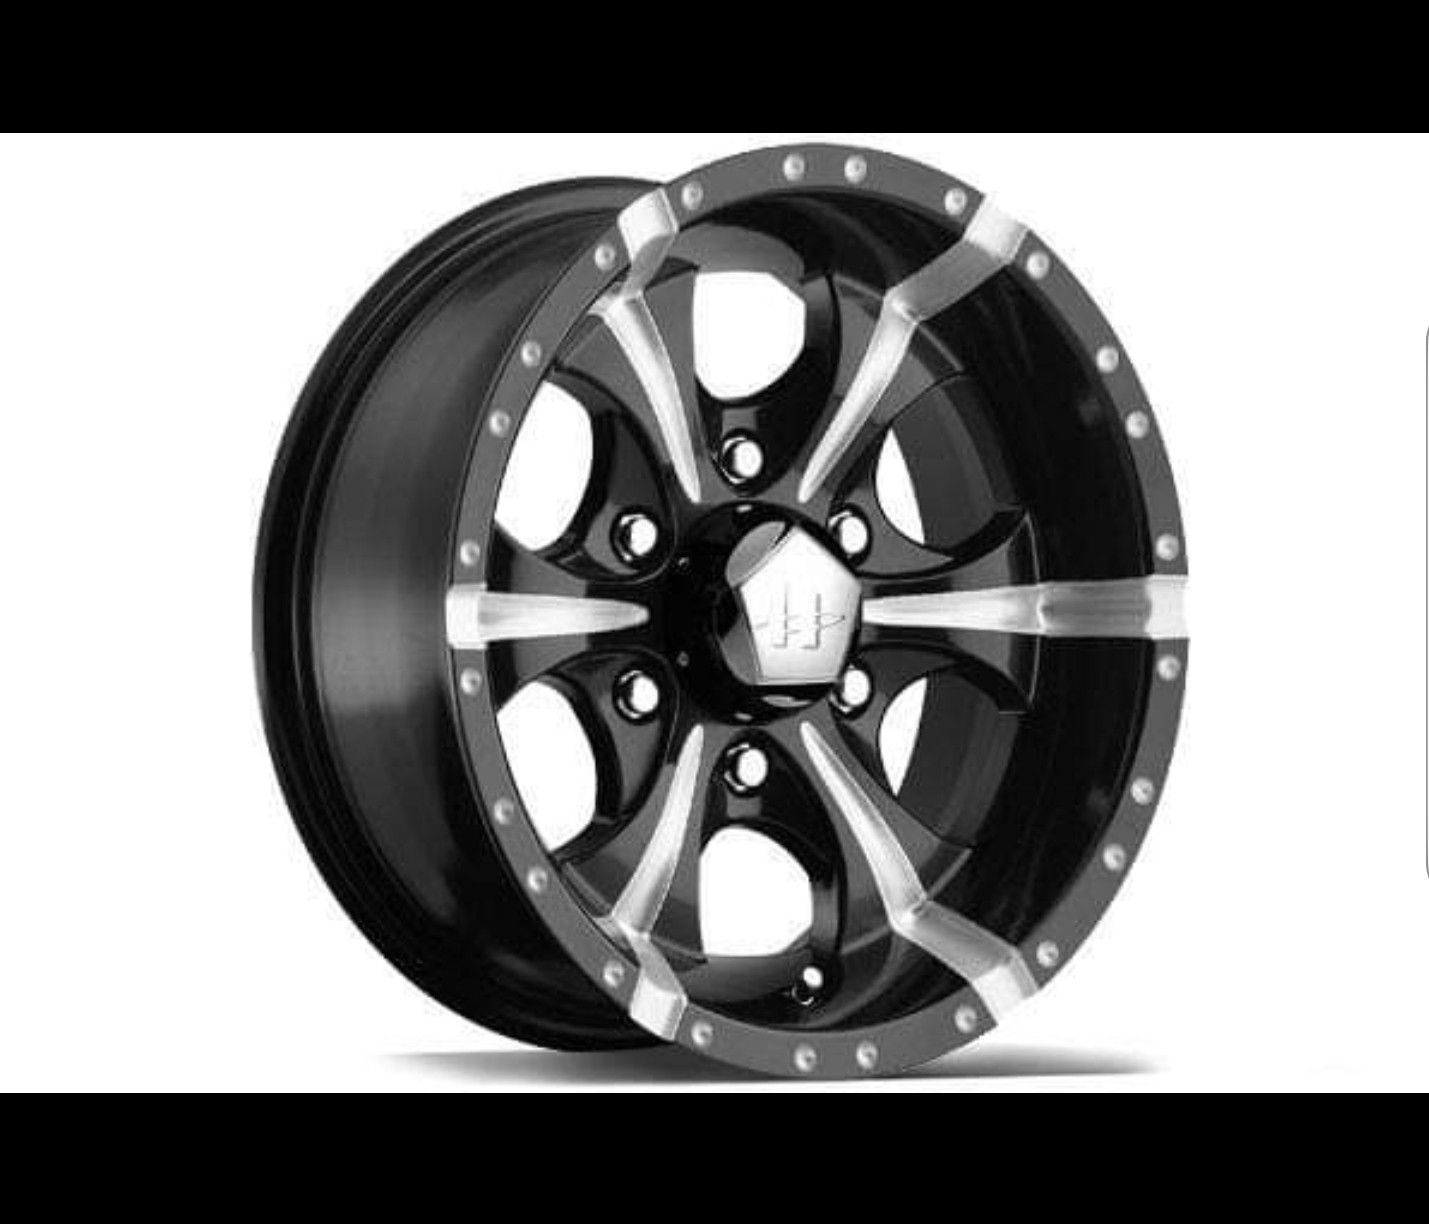 Helo HE791 wheel rim & tire packages available! Easy financing no credit